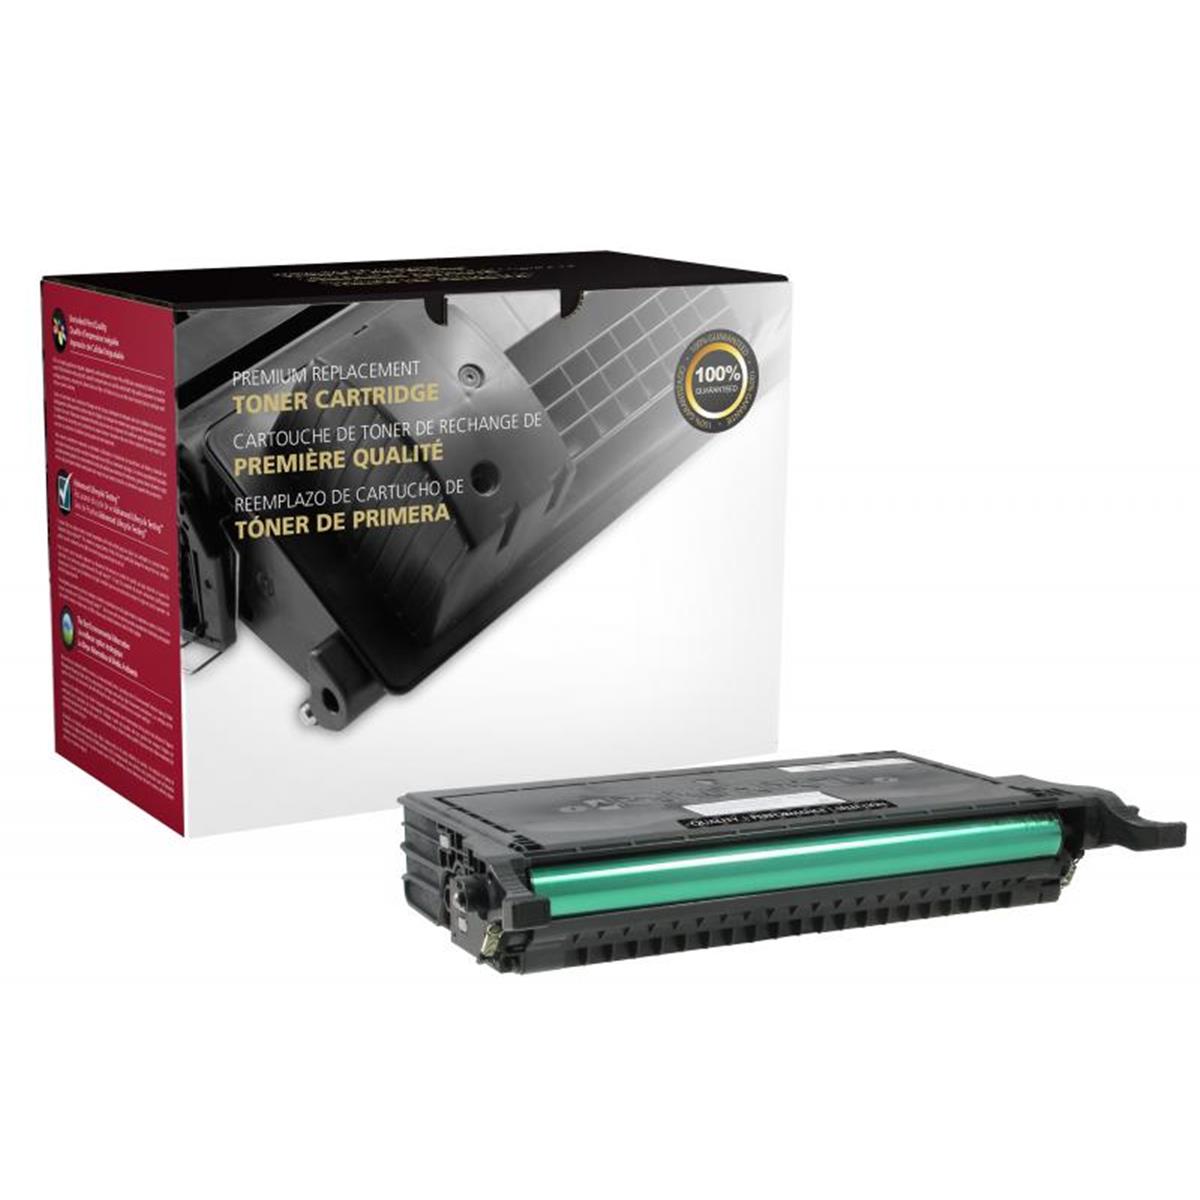 Picture of Dell 200533P High Yield Black Toner Cartridge for Dell 2145